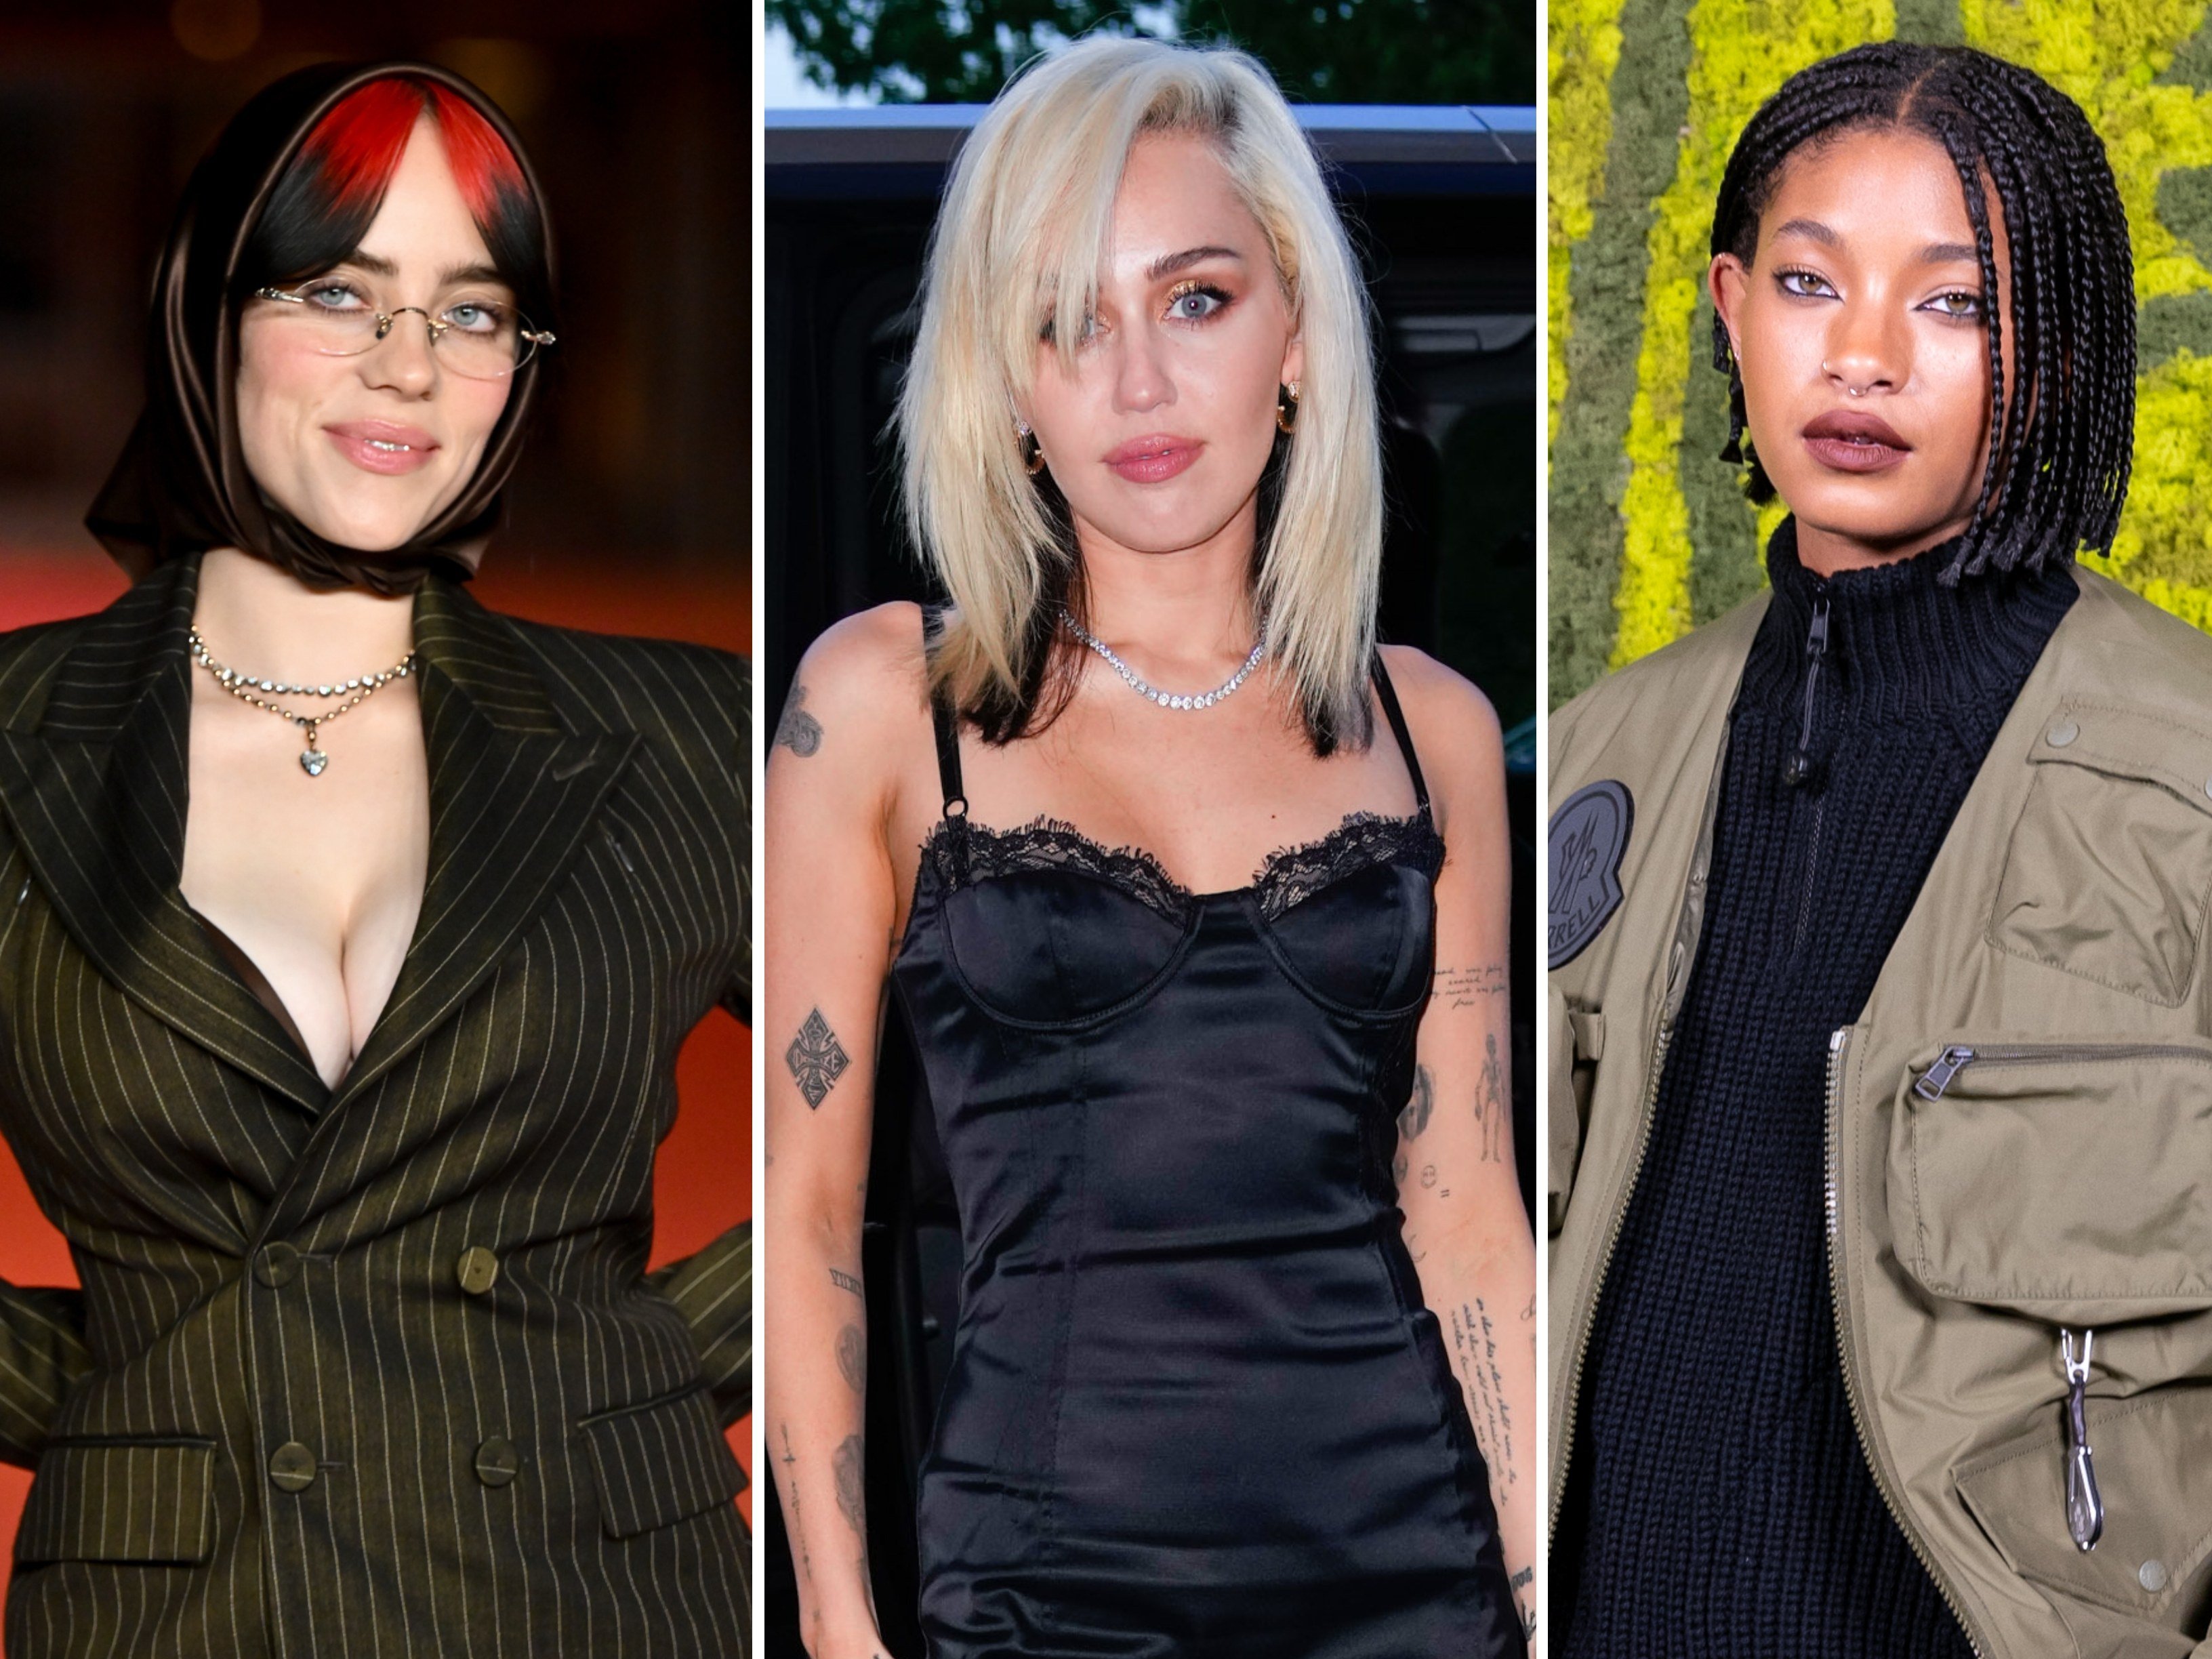 Billie Eilish, Miley Cyrus and Willow Smith all identify as LGBT. Photo: Getty Images